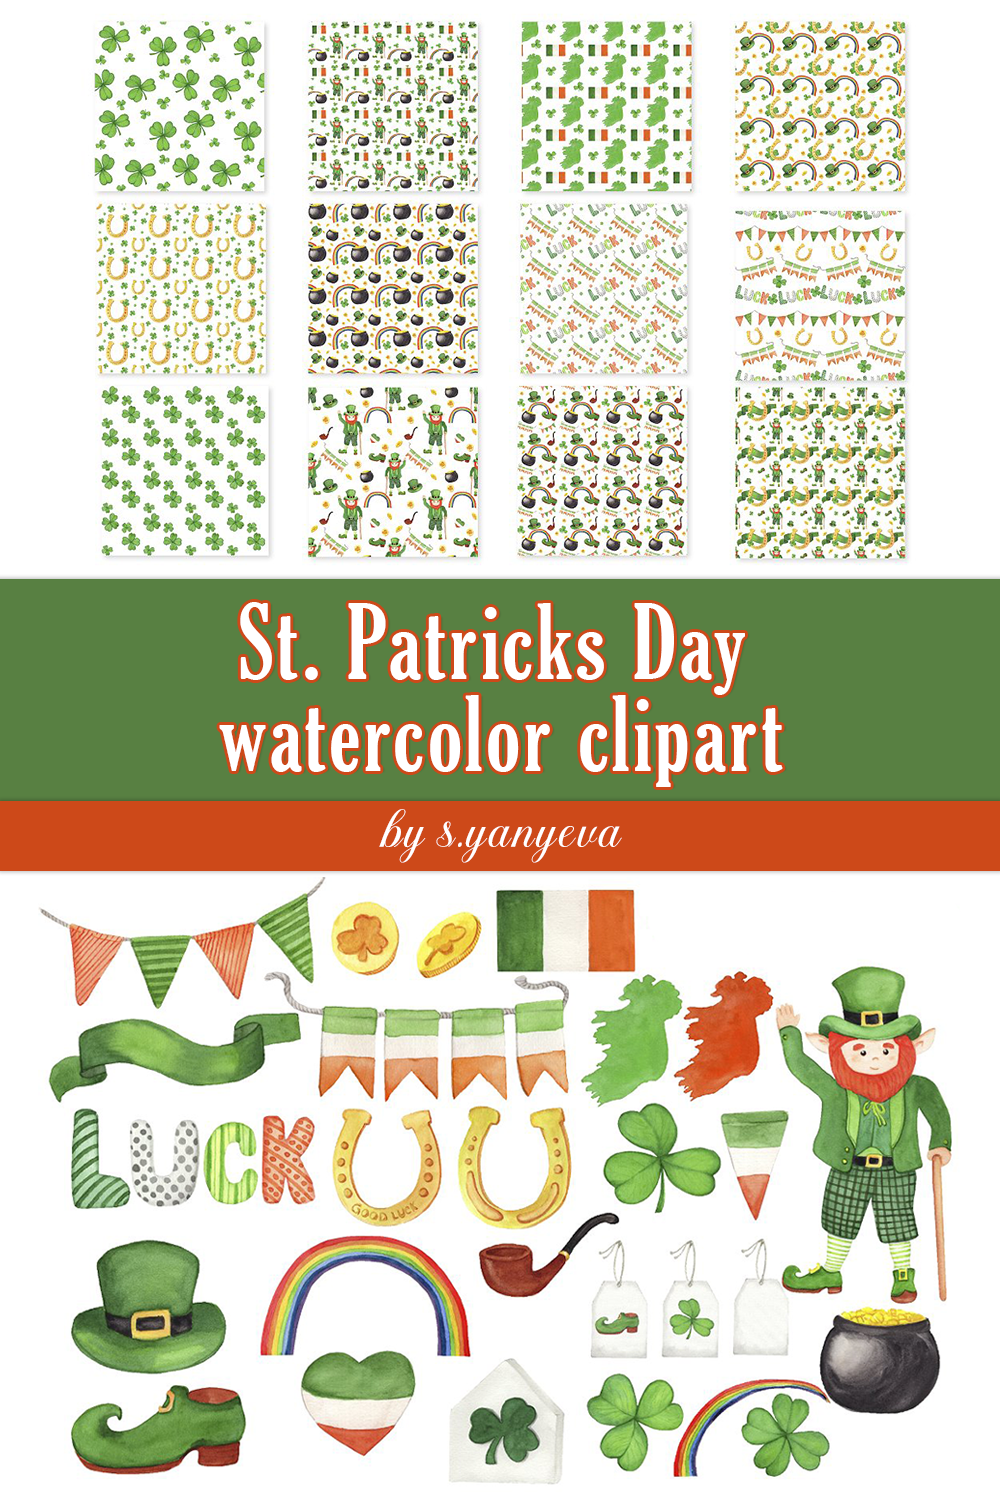 Patricks day watercolor clipart of pinterest.